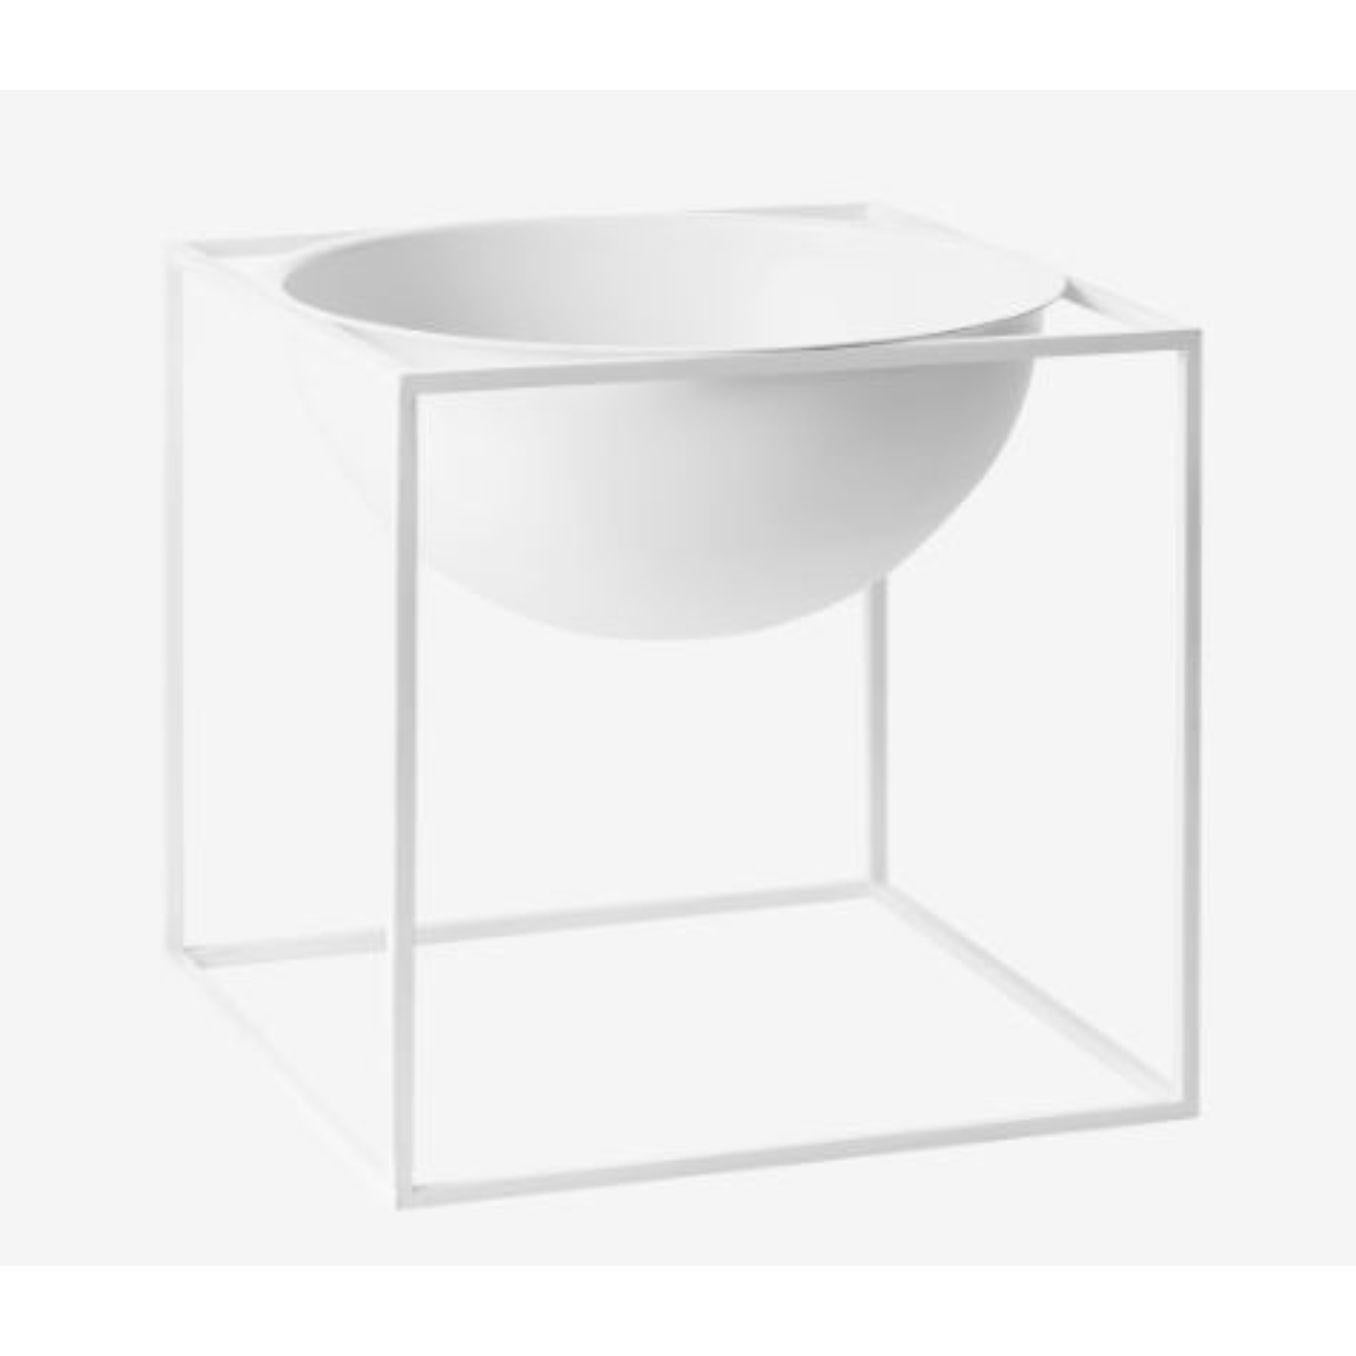 White large kubus bowl by Lassen
Dimensions: D 23 x W 23 x H 23 cm 
Materials: Metal 
Weight: 3 Kg

Kubus bowl is based on original sketches by Mogens Lassen, and contains elements from Bauhaus, which Mogens Lassen took inspiration from. Kubus